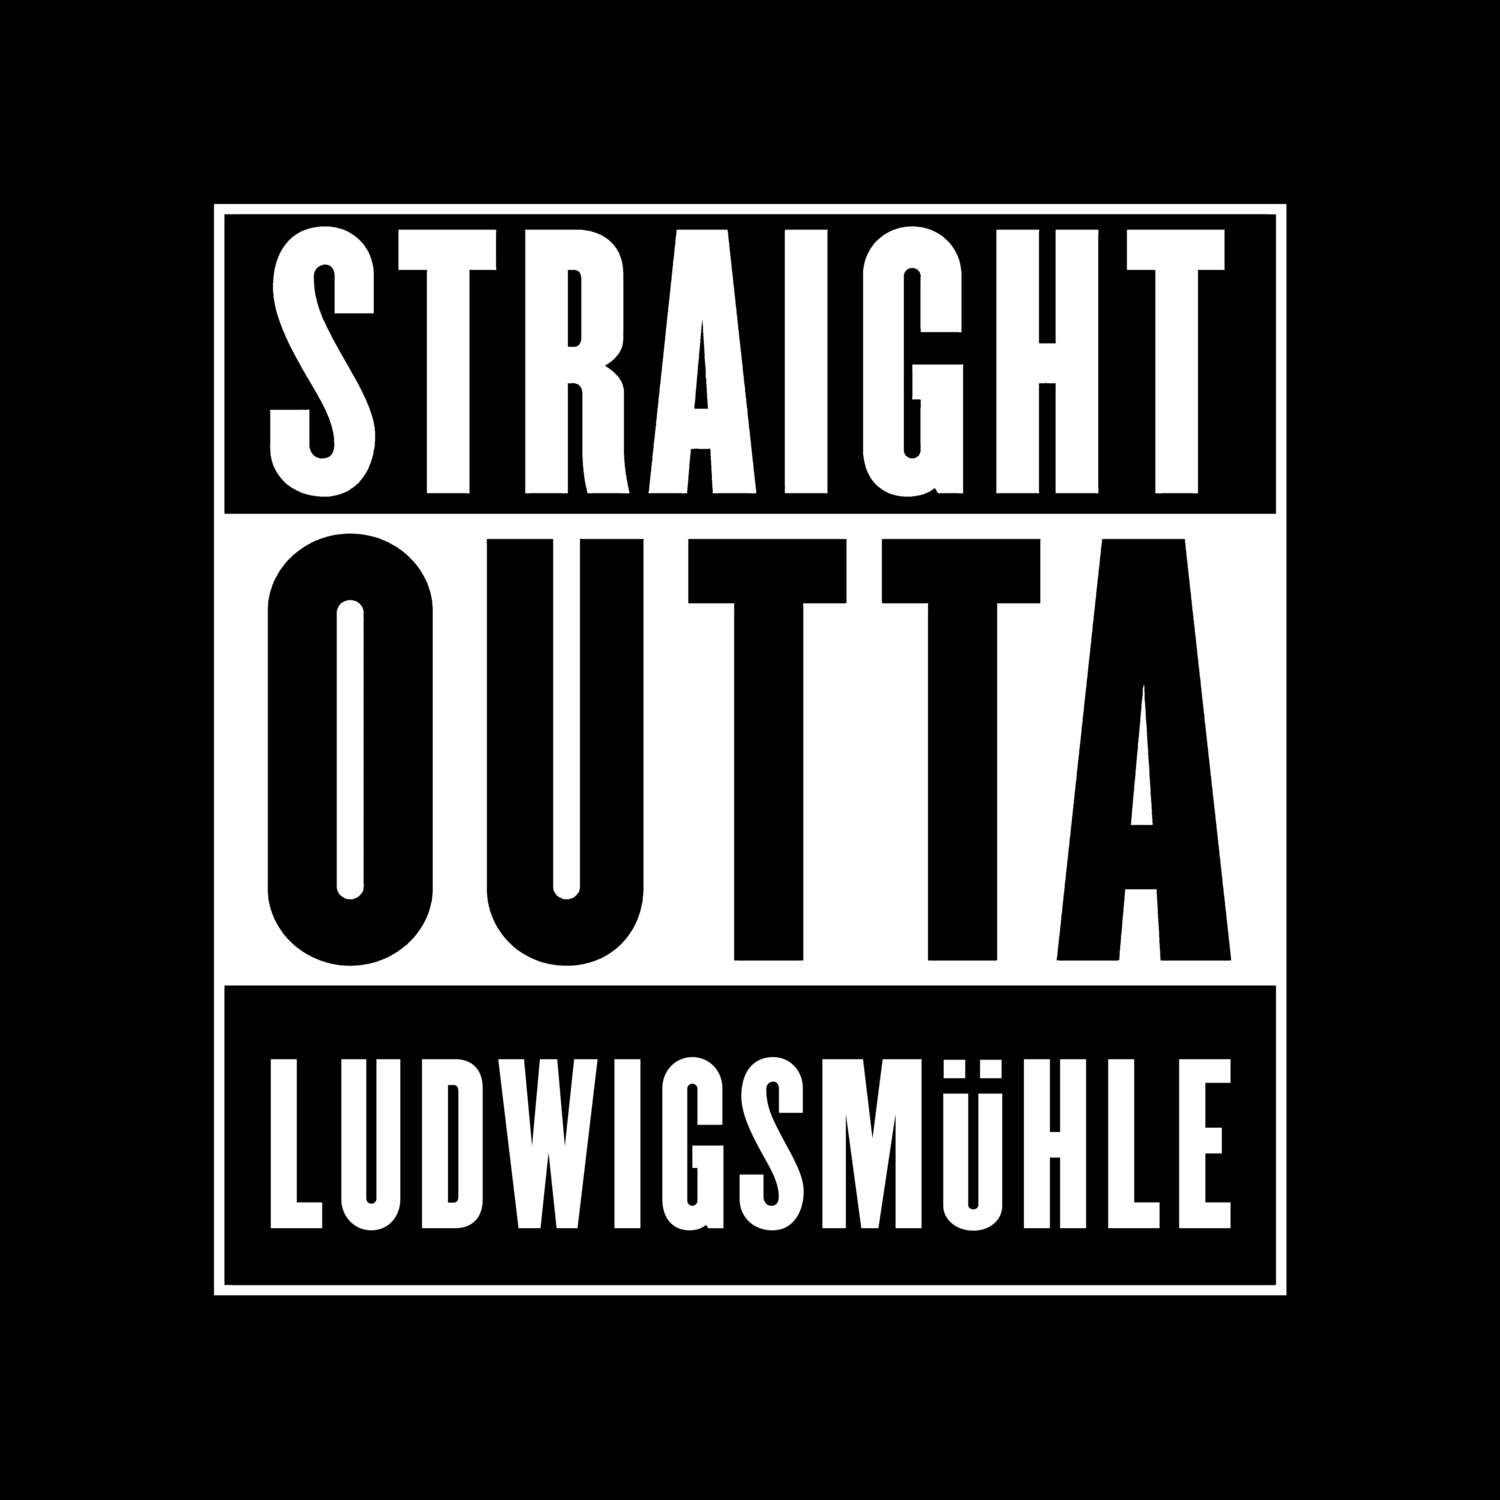 Ludwigsmühle T-Shirt »Straight Outta«